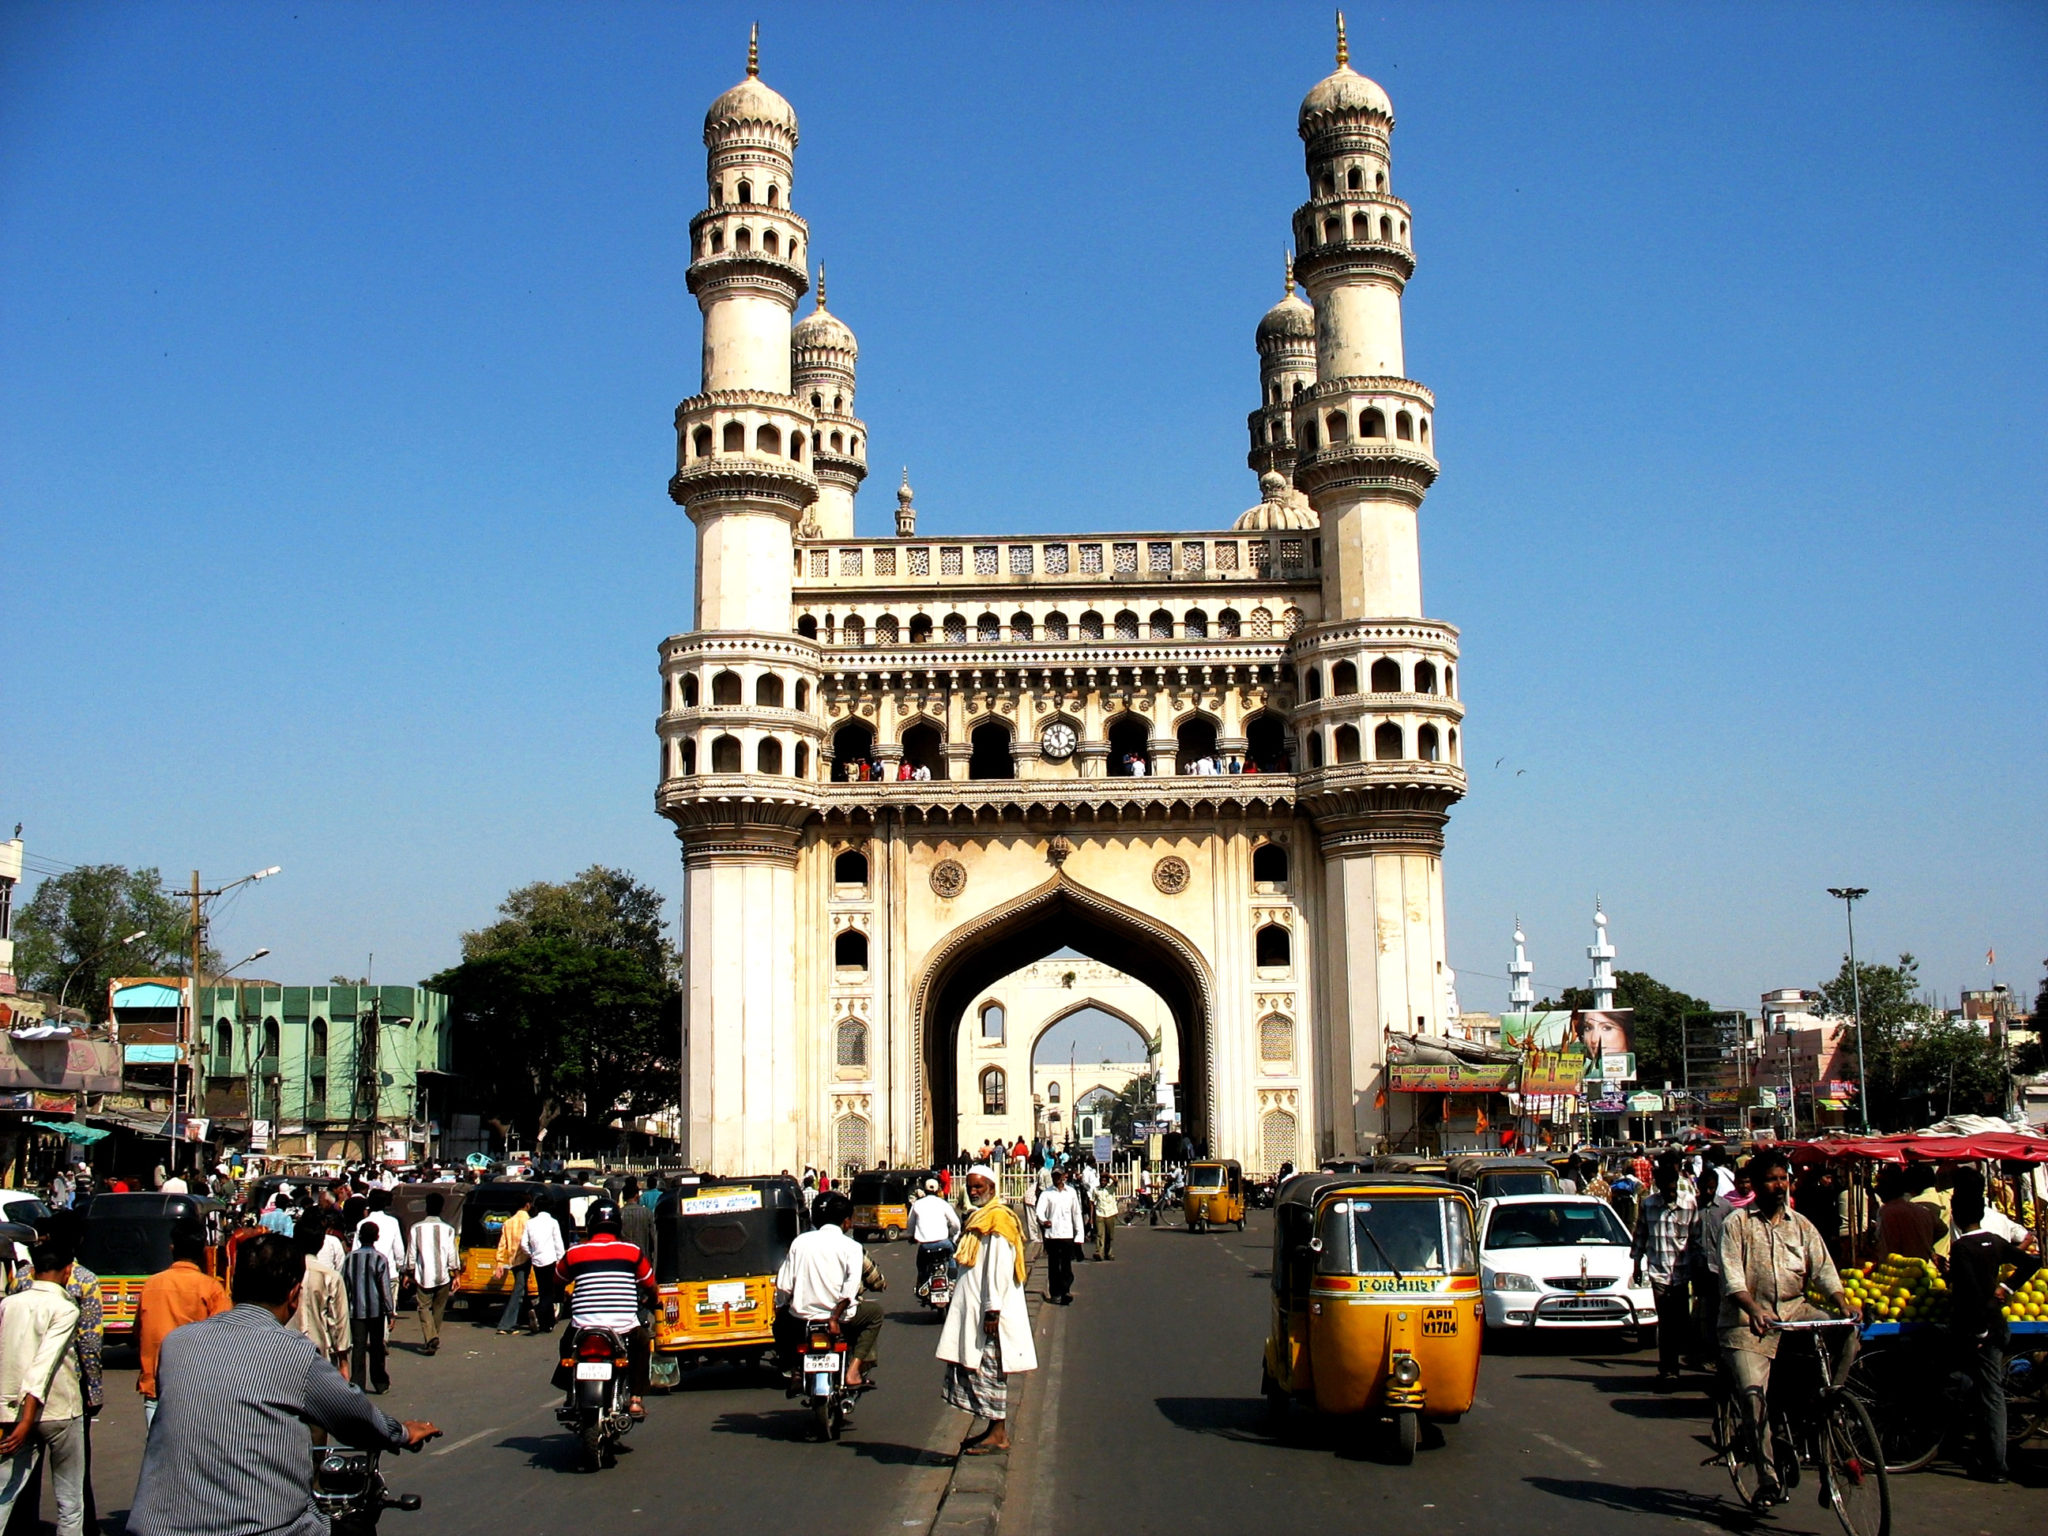 Top 10 Historical Monuments Of India